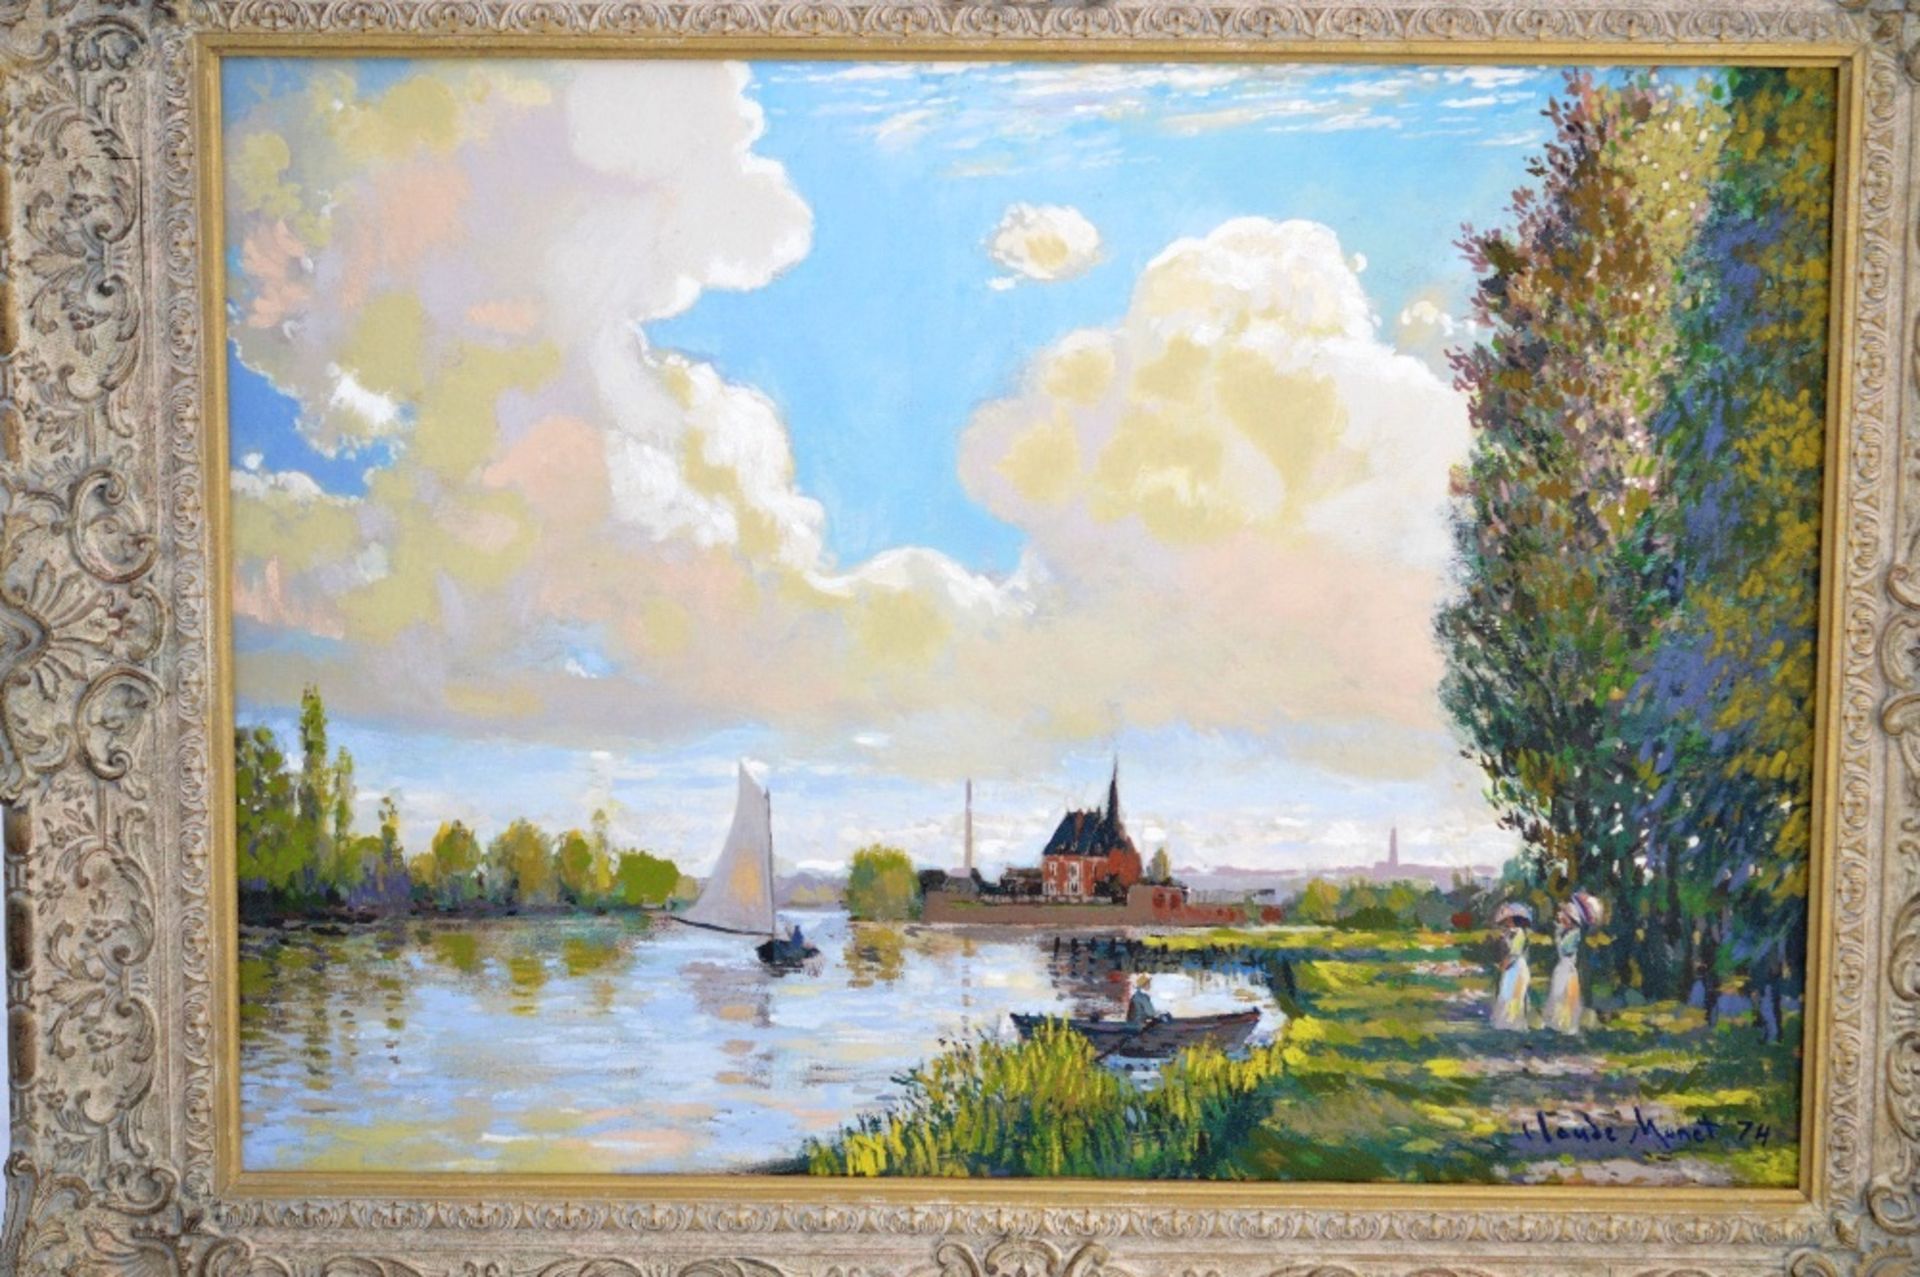 John Wyatt- the famous forgery artist, Summer Afternoon, Argenteuill Limited Edition Atelier Canvas - Image 3 of 4